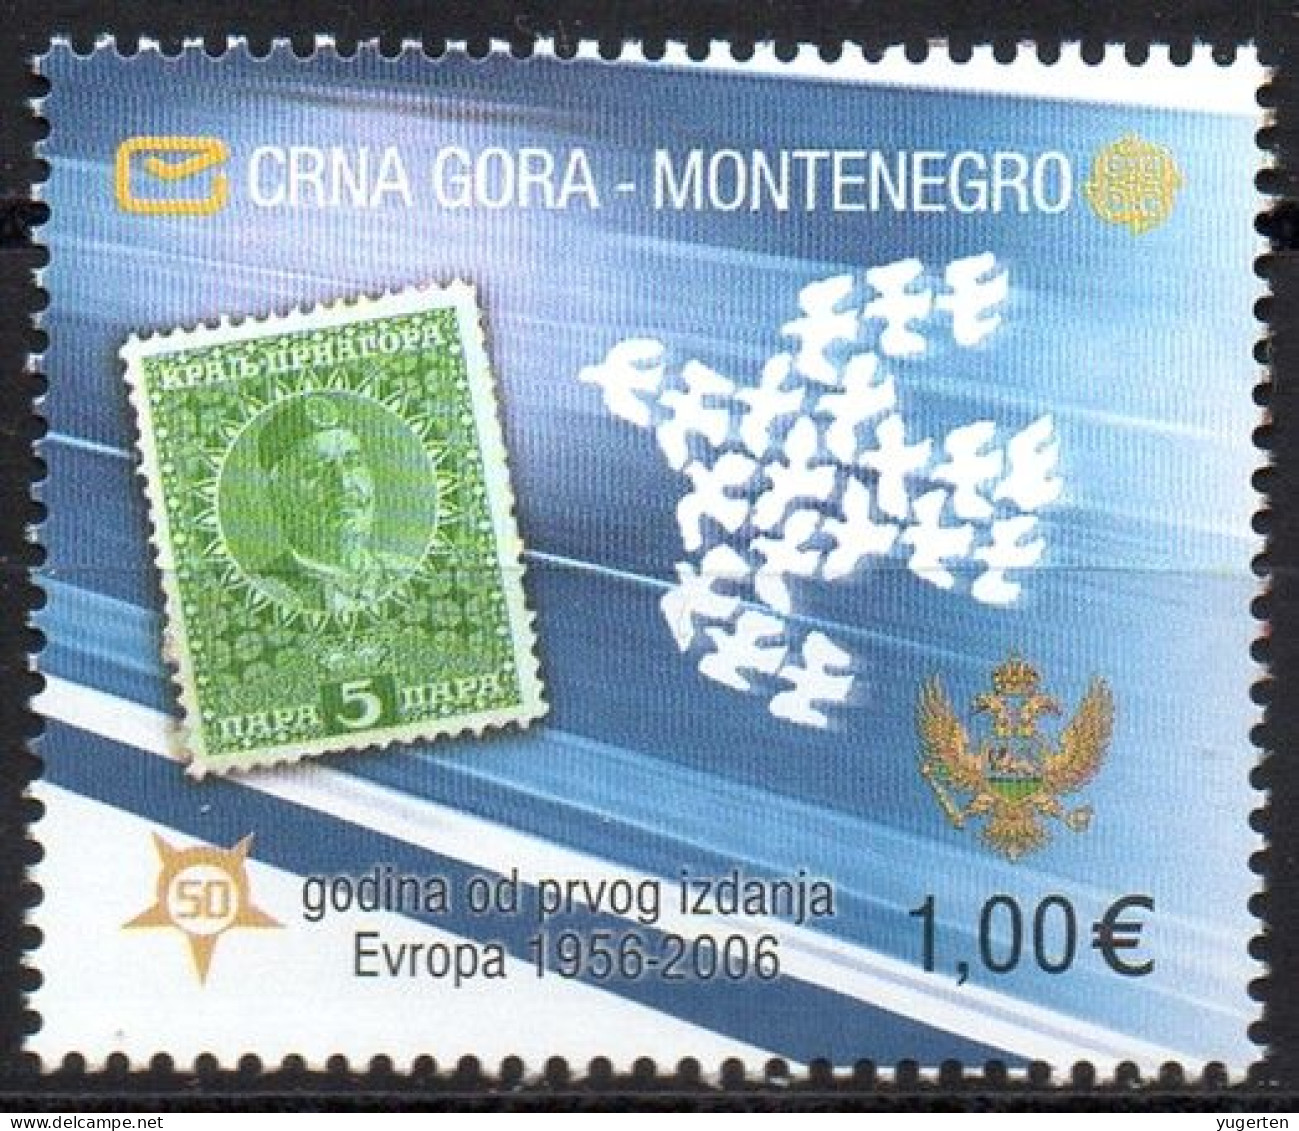 MONTENEGRO 2006 - 1v - MNH - Europa 50 Years Anniv.- Colombe - Pigeon - Peace - Paix - Dove - Stamps On Stamps Taube - Columbiformes